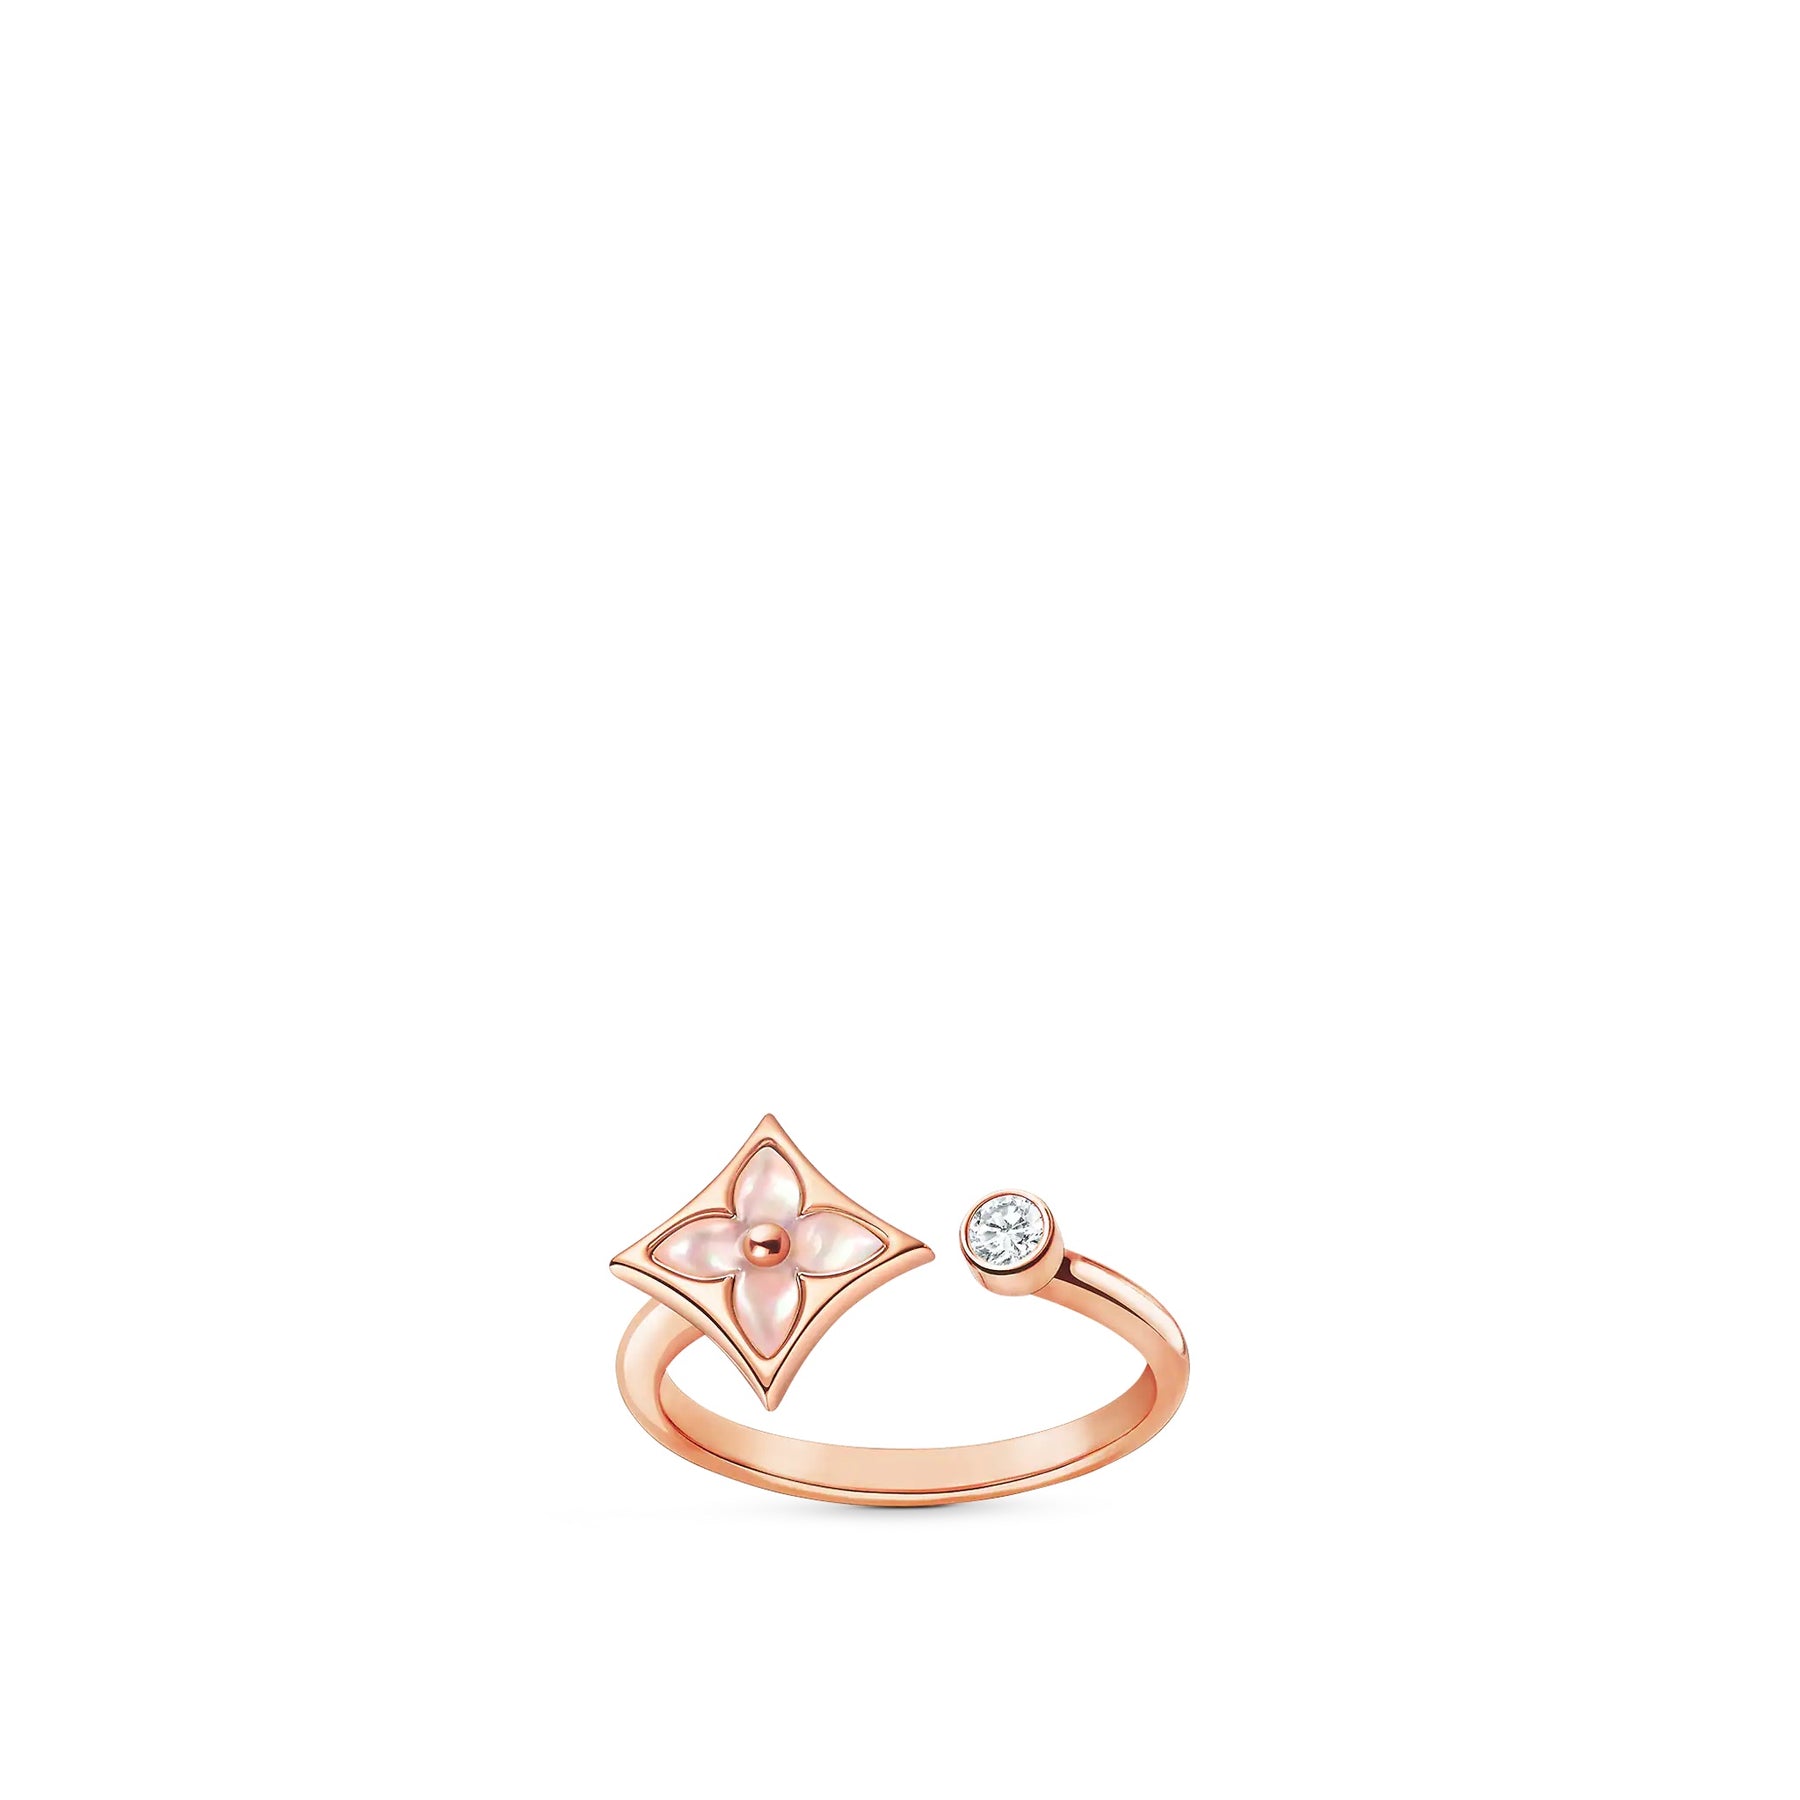 Louis Vuitton Idylle Blossom Paved Ring